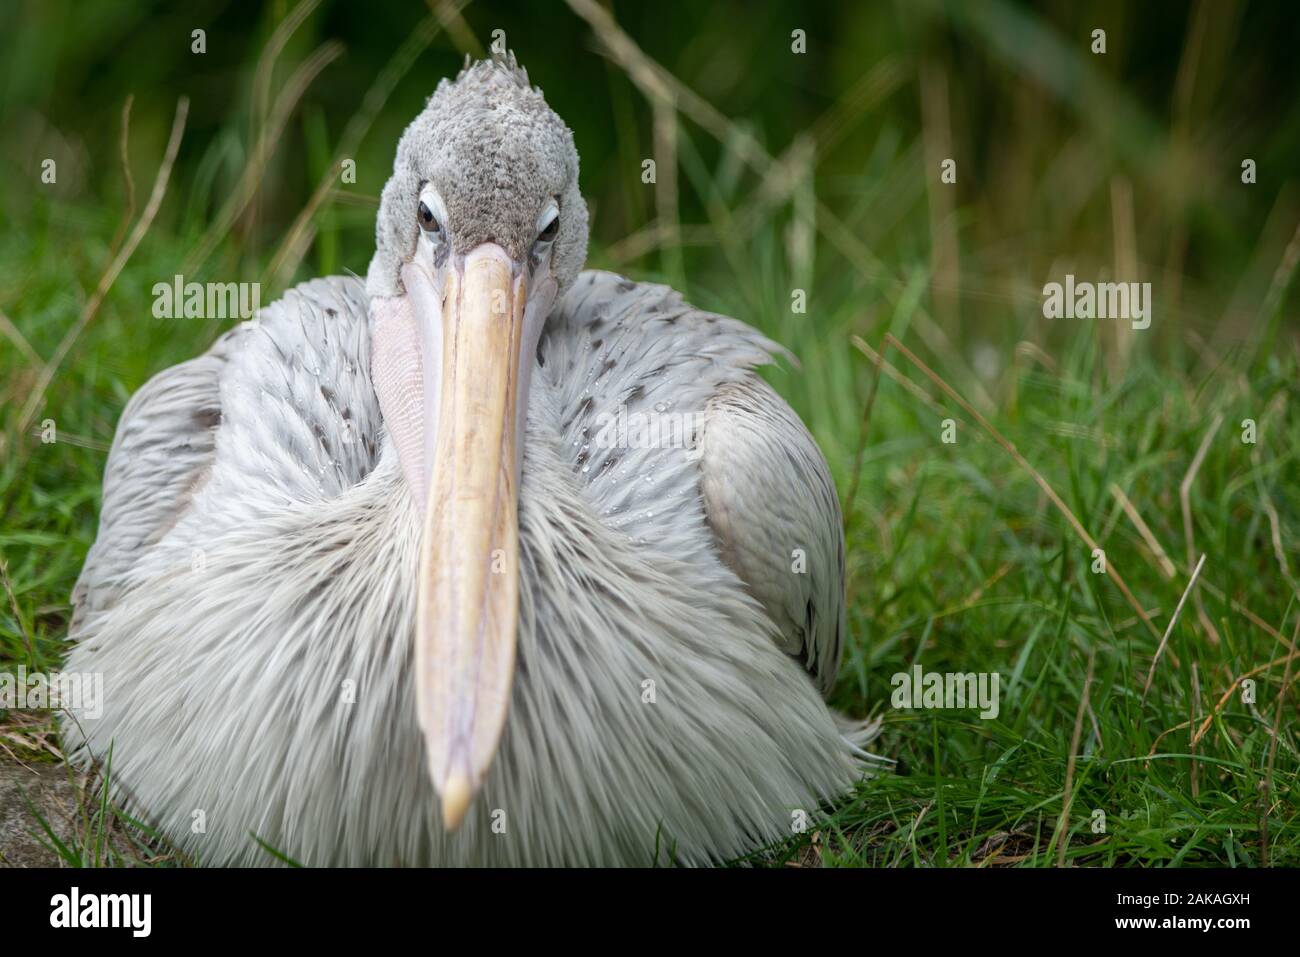 A white pelican at rest Stock Photo